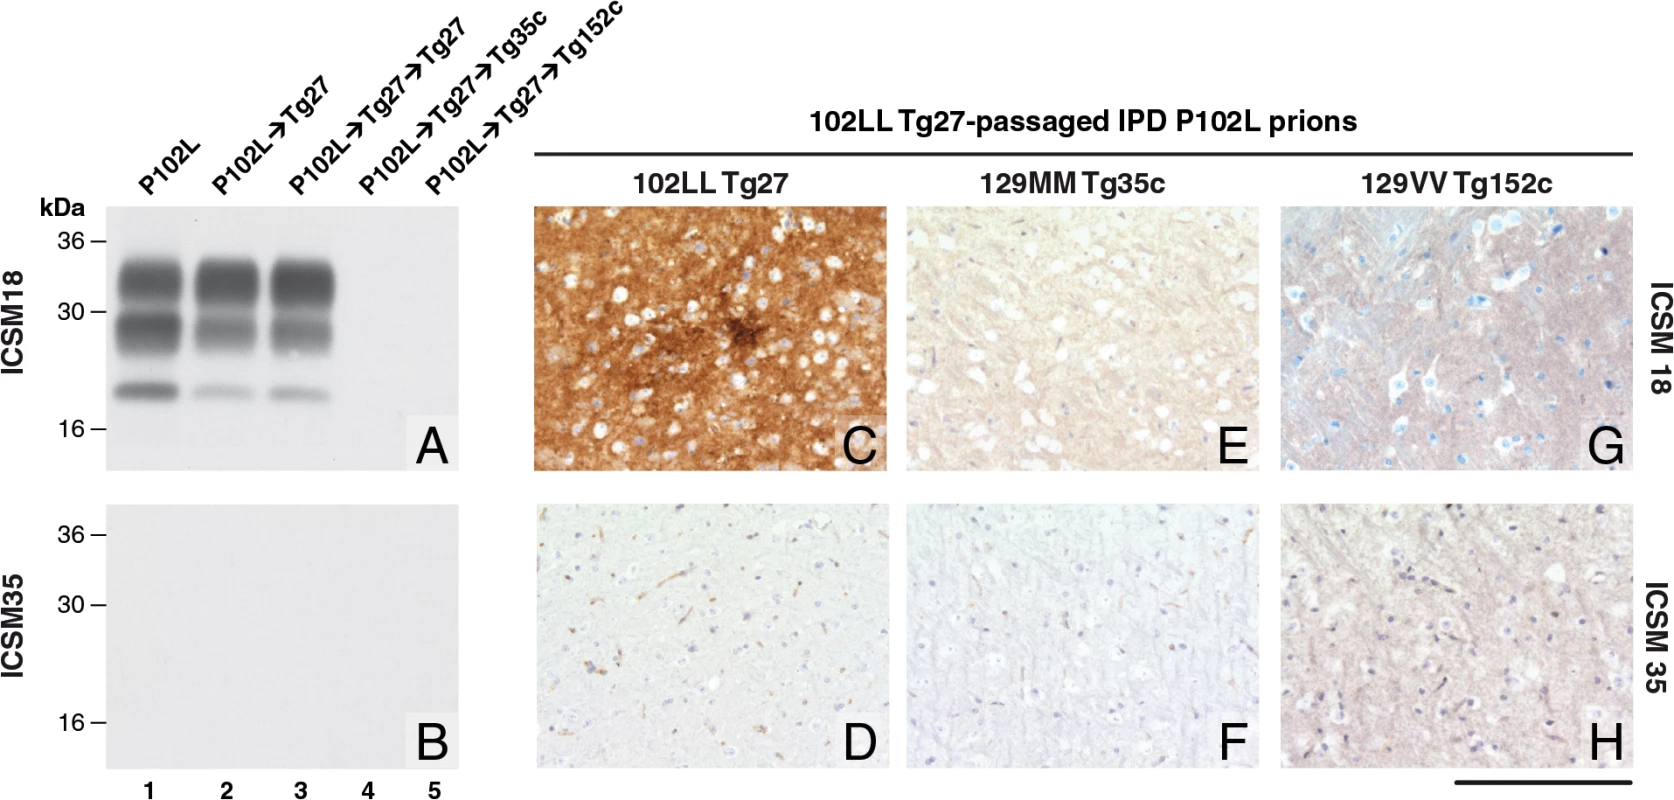 Detection of disease-related PrP by immunohistochemistry and immunoblotting in brains of transgenic mice inoculated with GSS-102L prions.